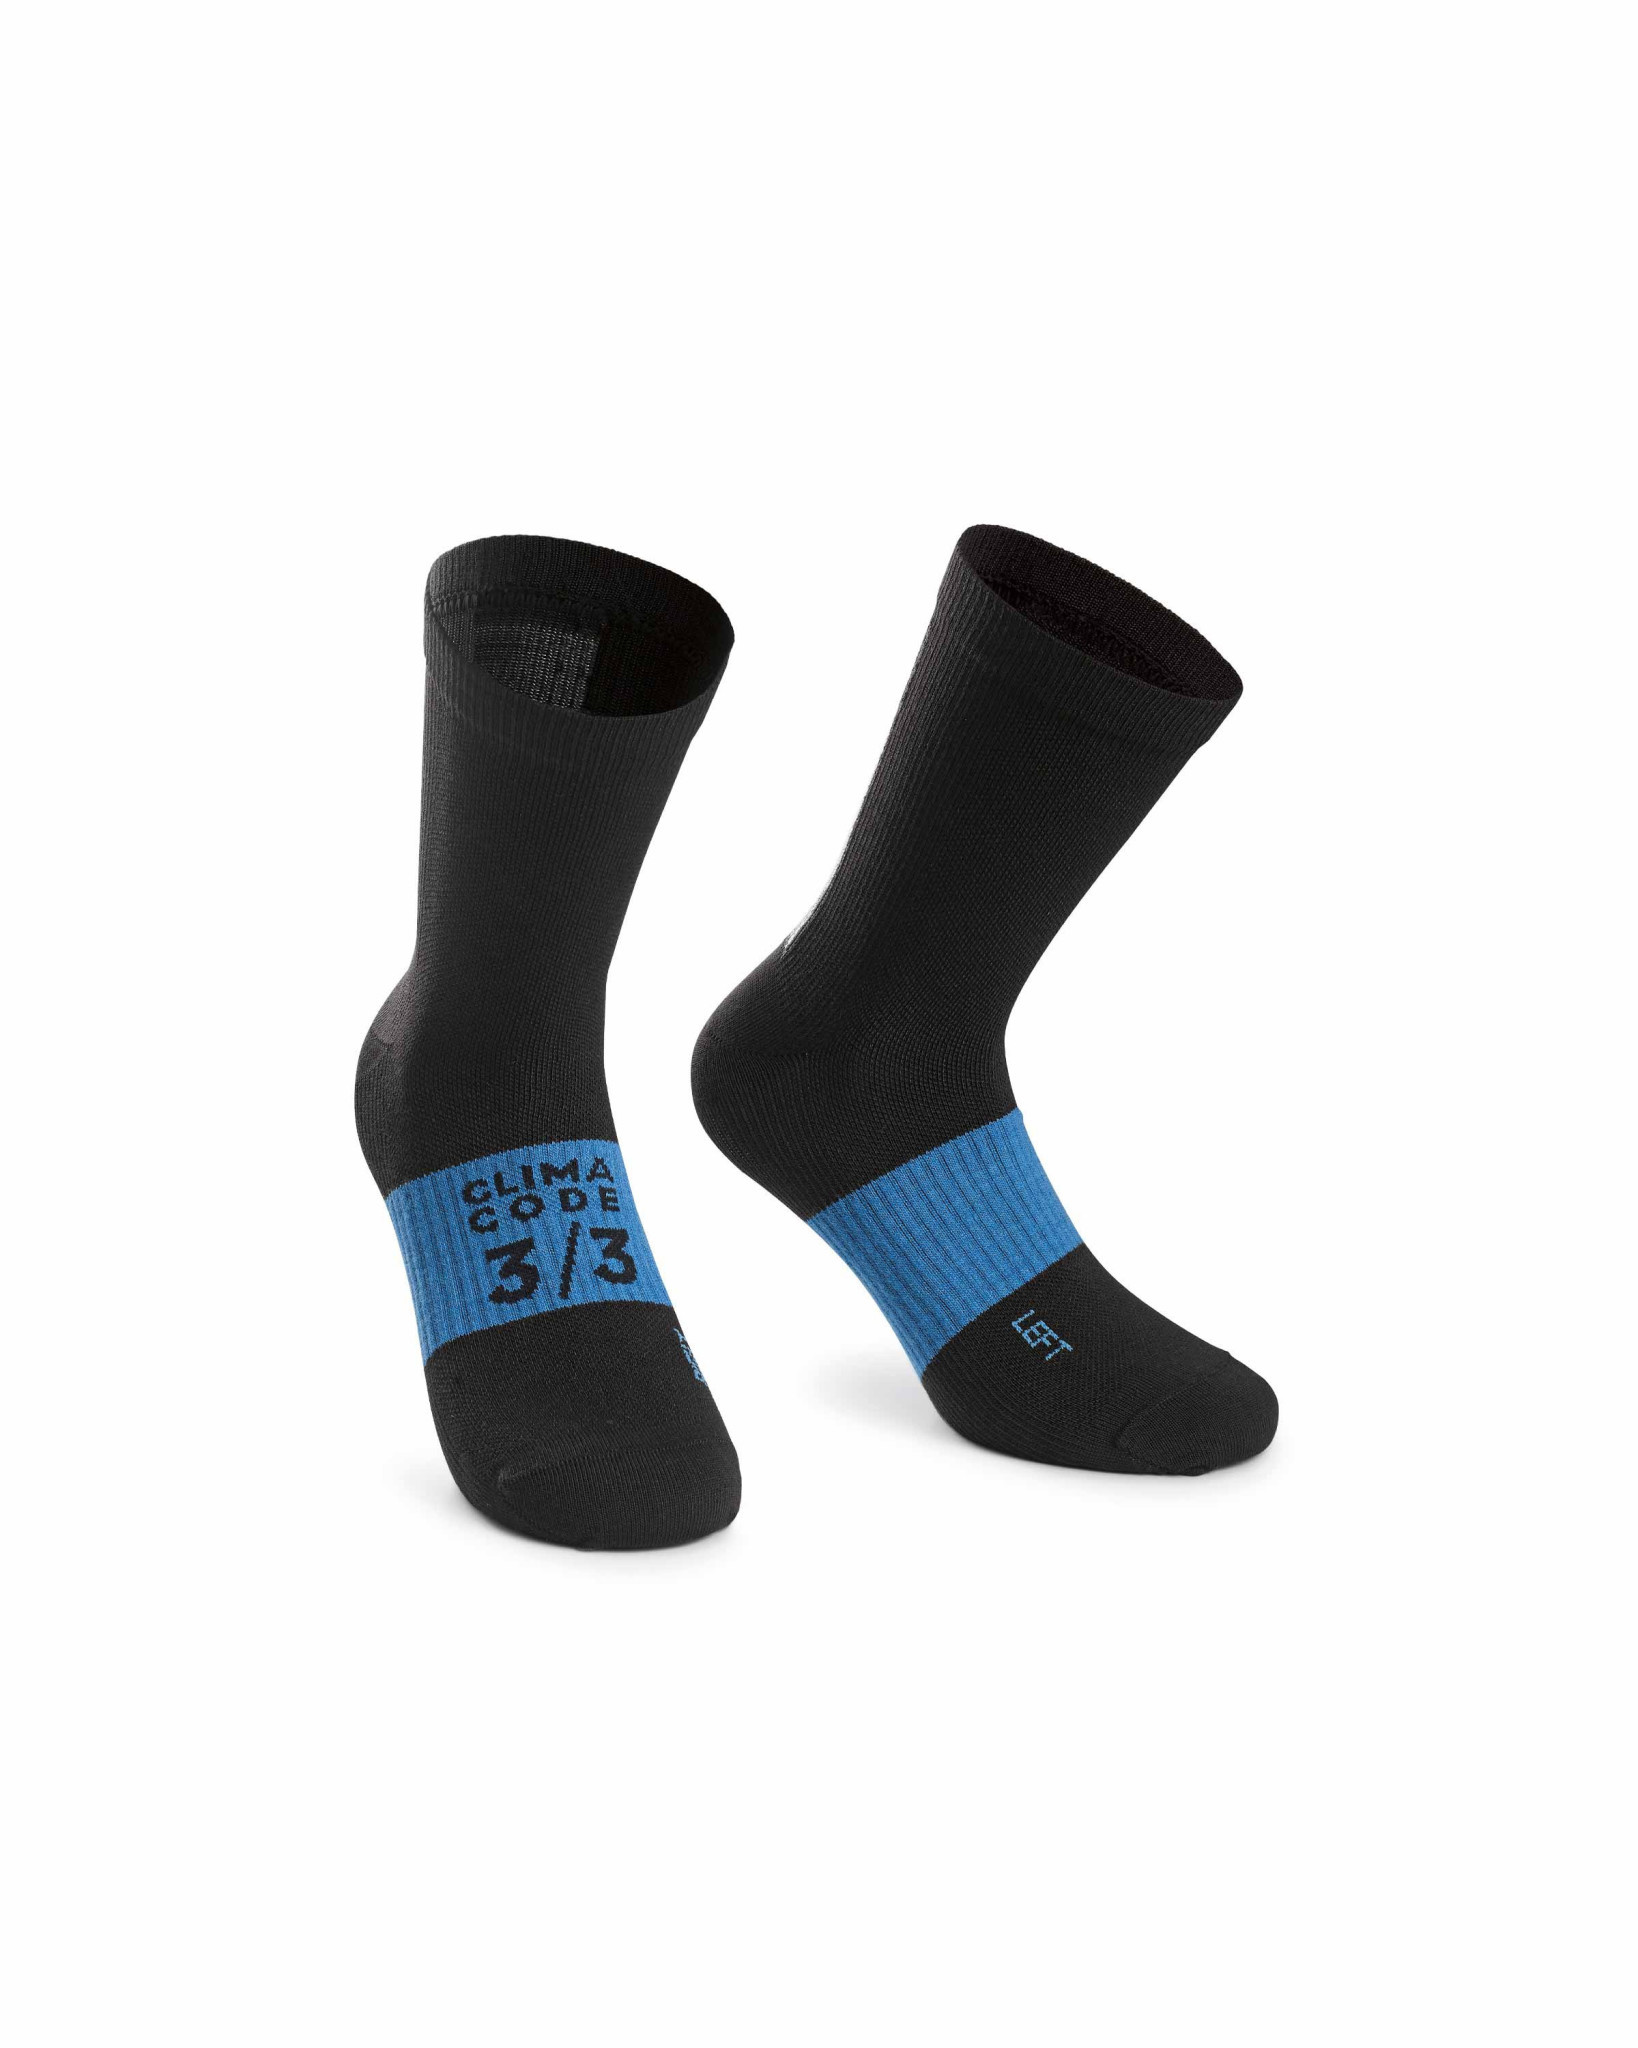 assos Assos Winter Socks Black Size 0 - 73Degrees Bicycle Shop Limited